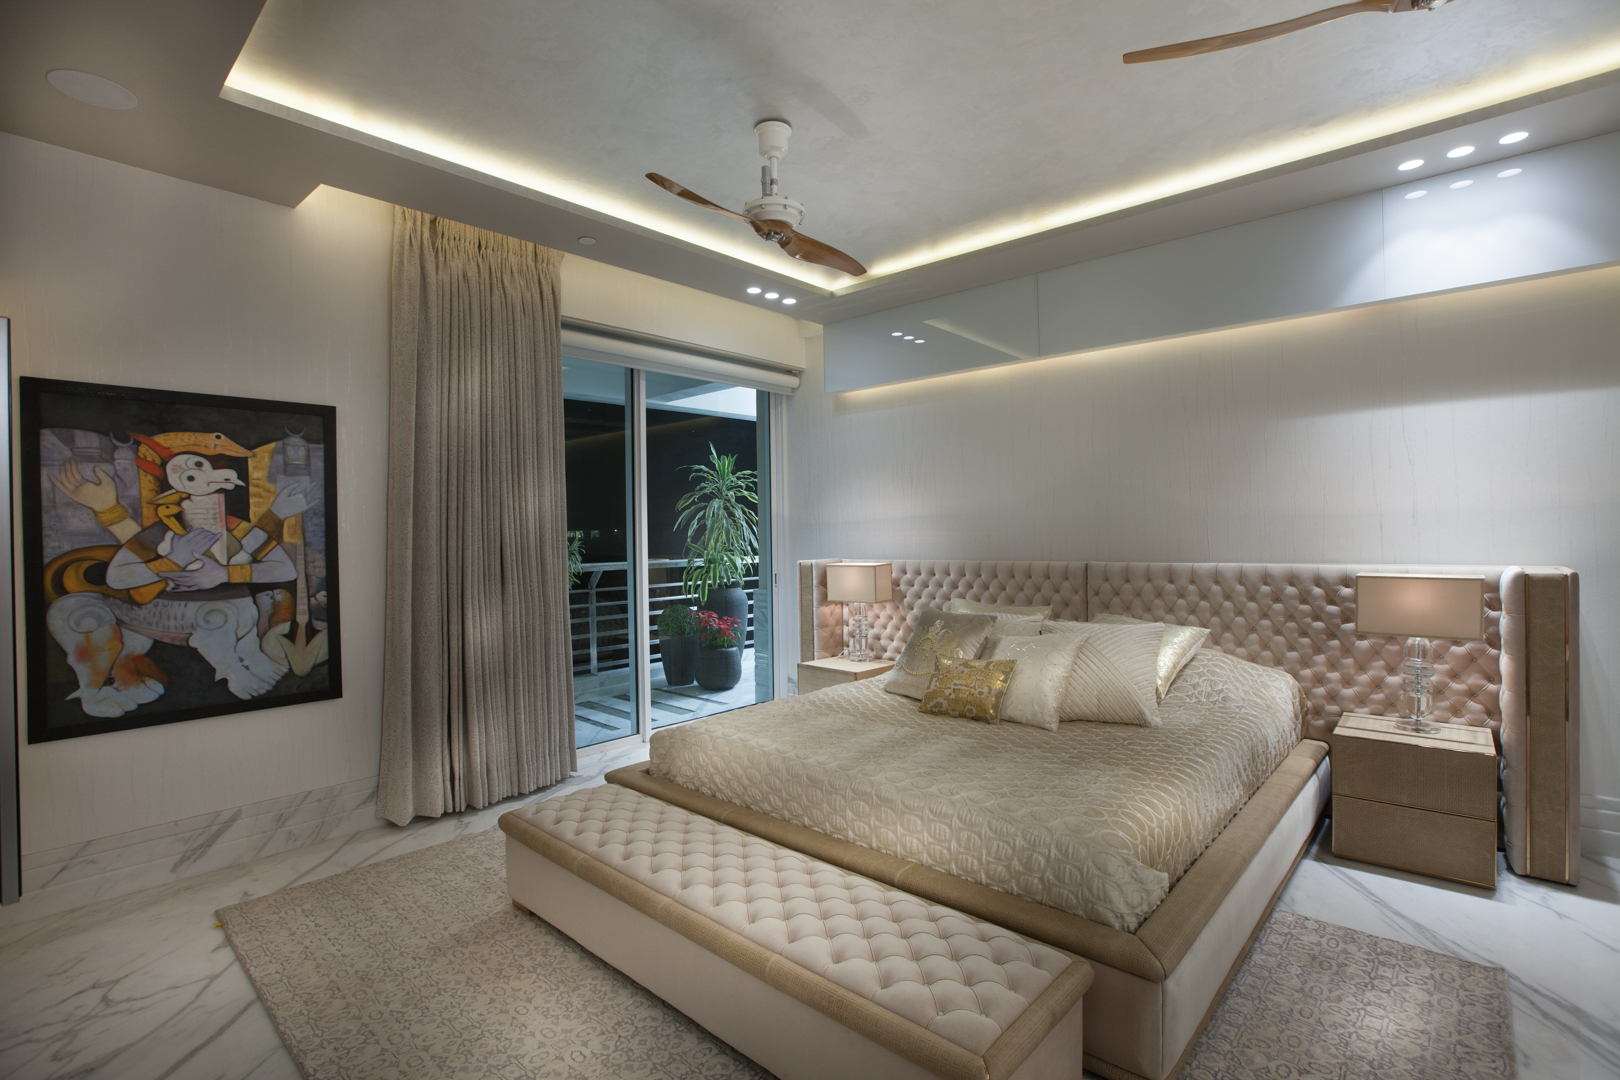 A Bed Room Design By Essentia Environments Jacpl